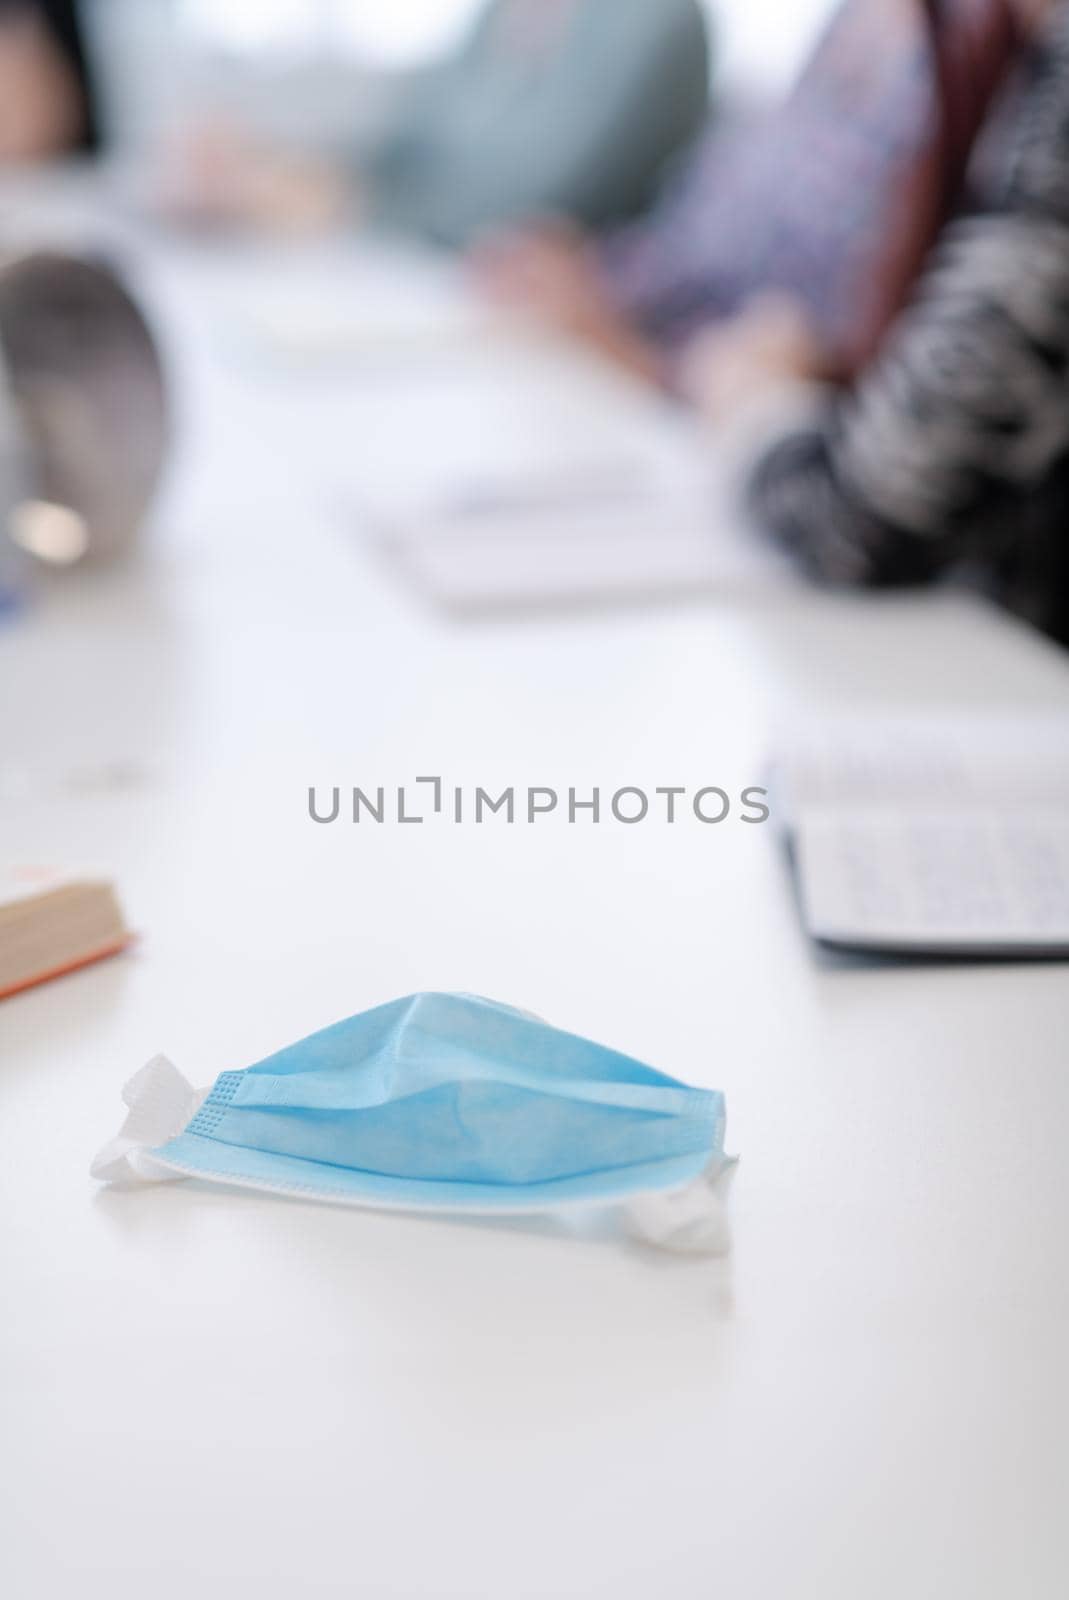 Closeup of protective medical face mask  at desk on business meeting  coronavirus pandemic new normal time